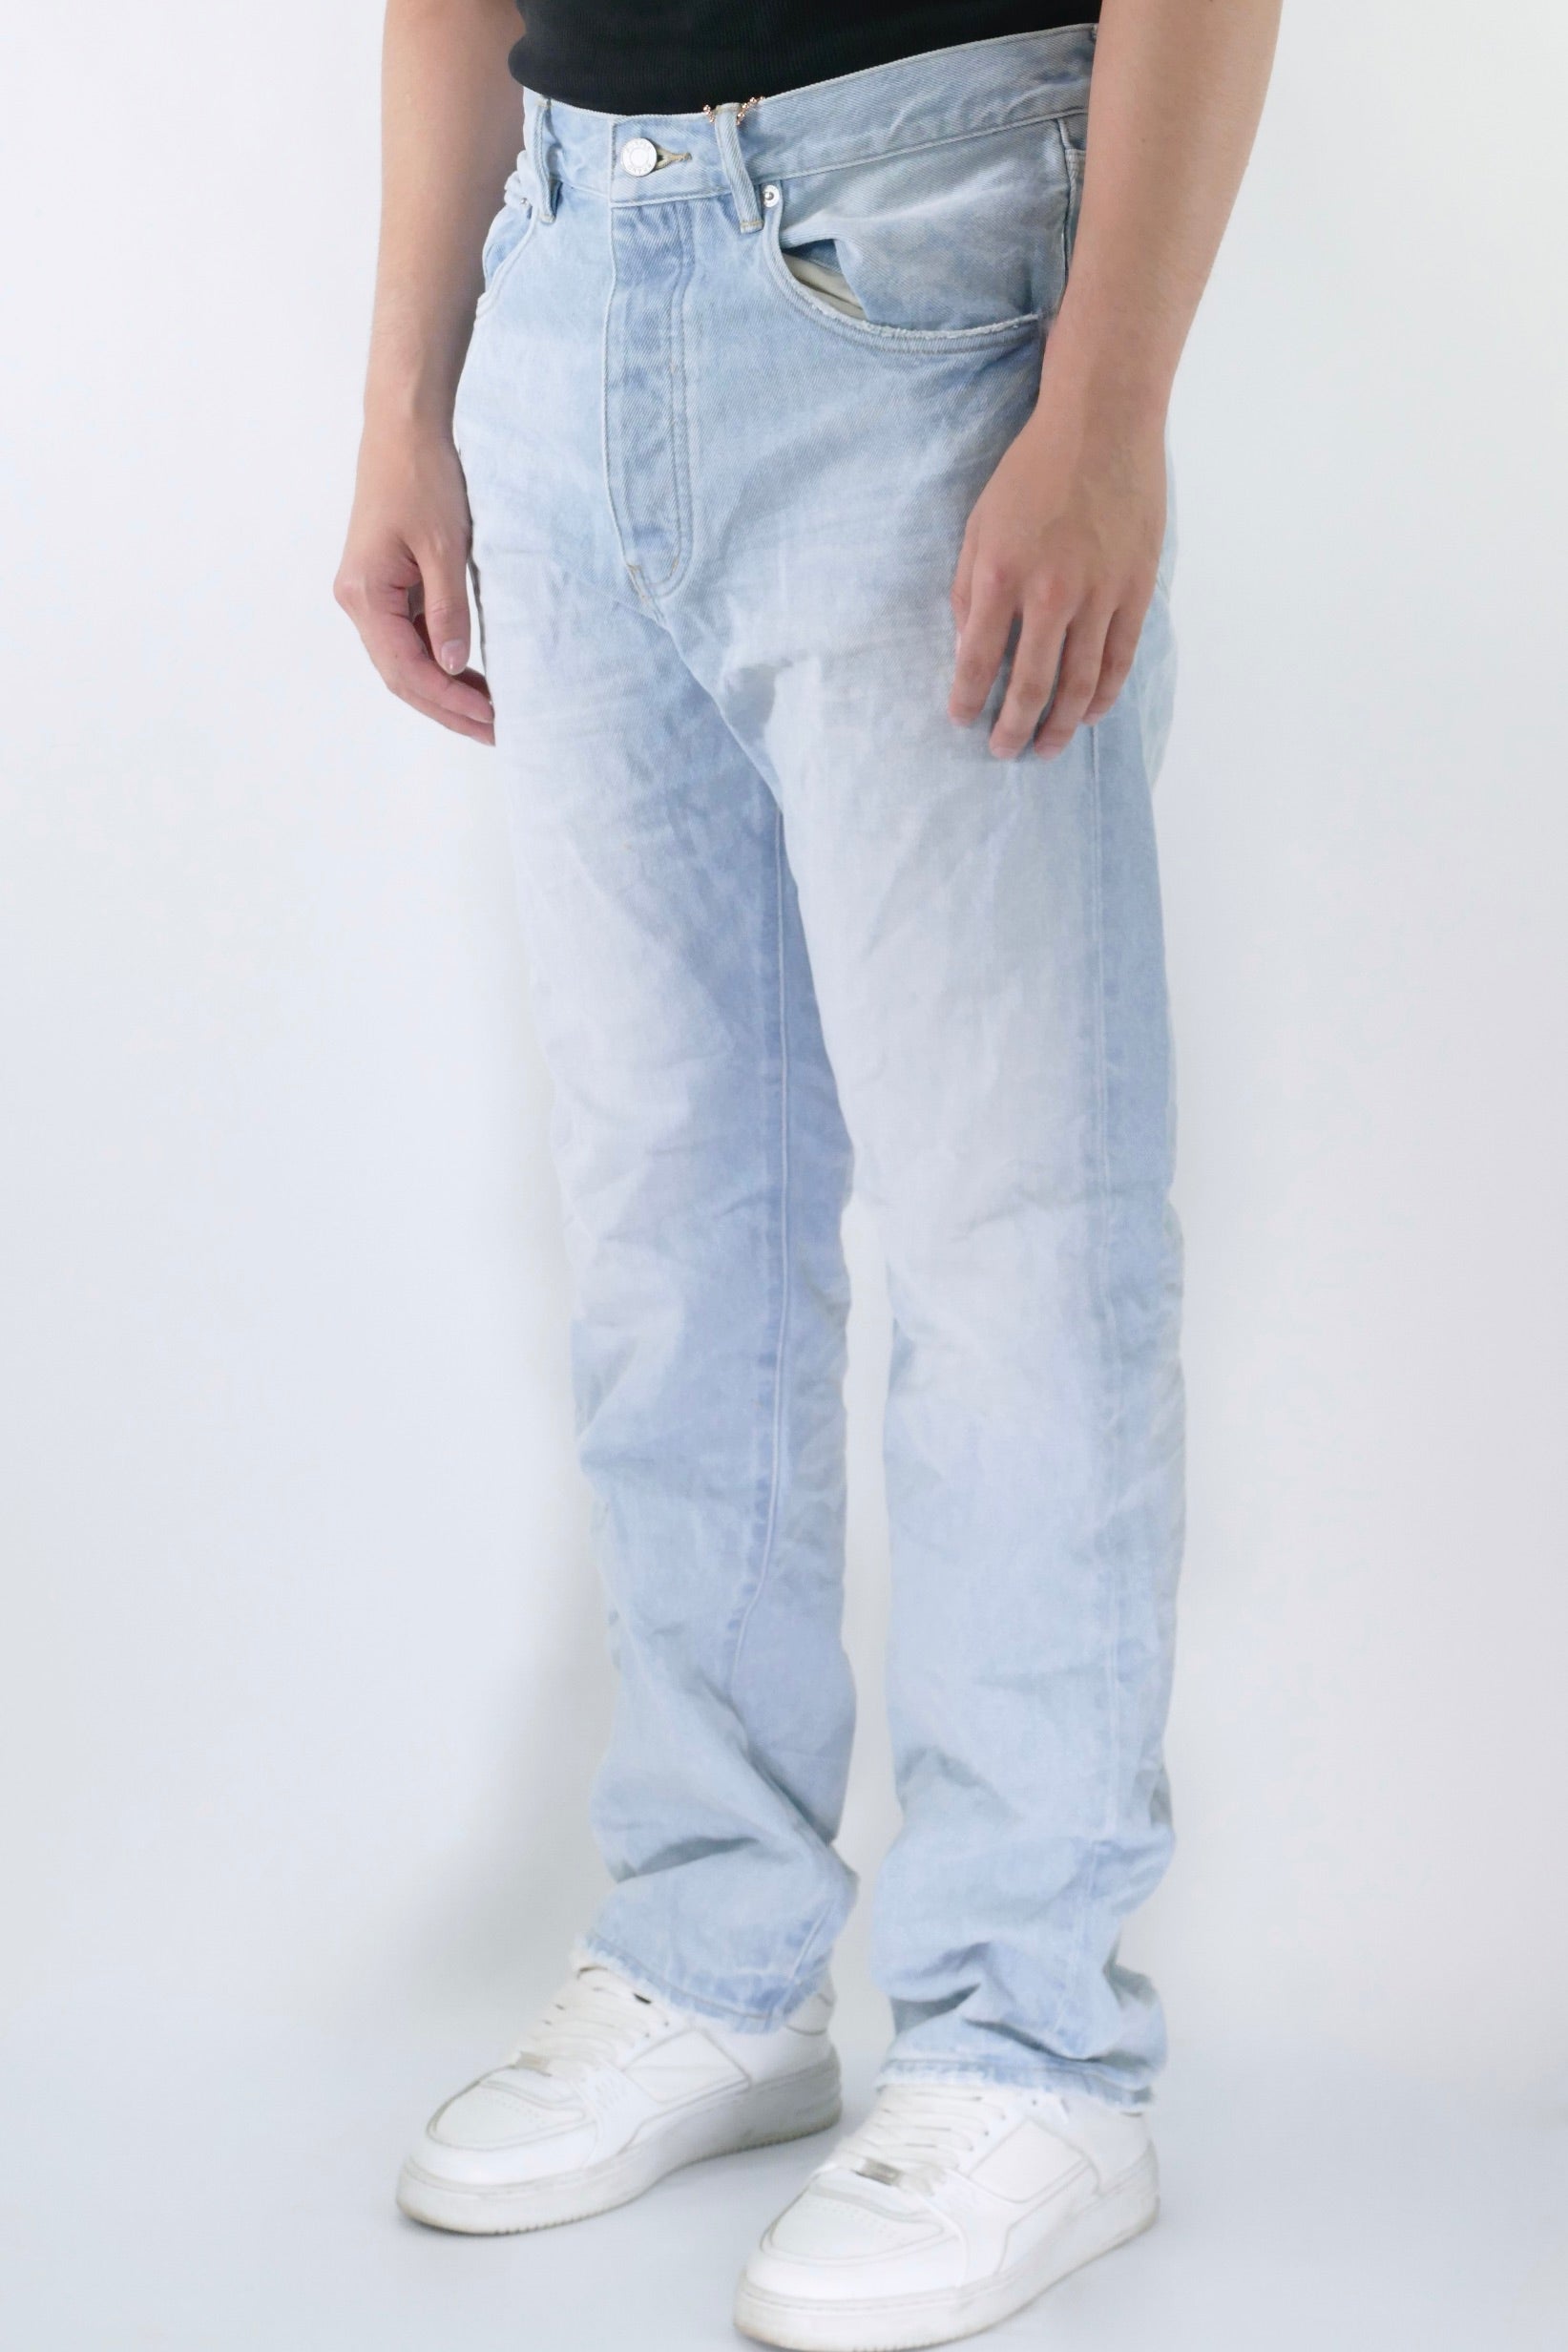 Purple Brand Five-Pocket Style Jeans With Rips Detail in Blue for Men